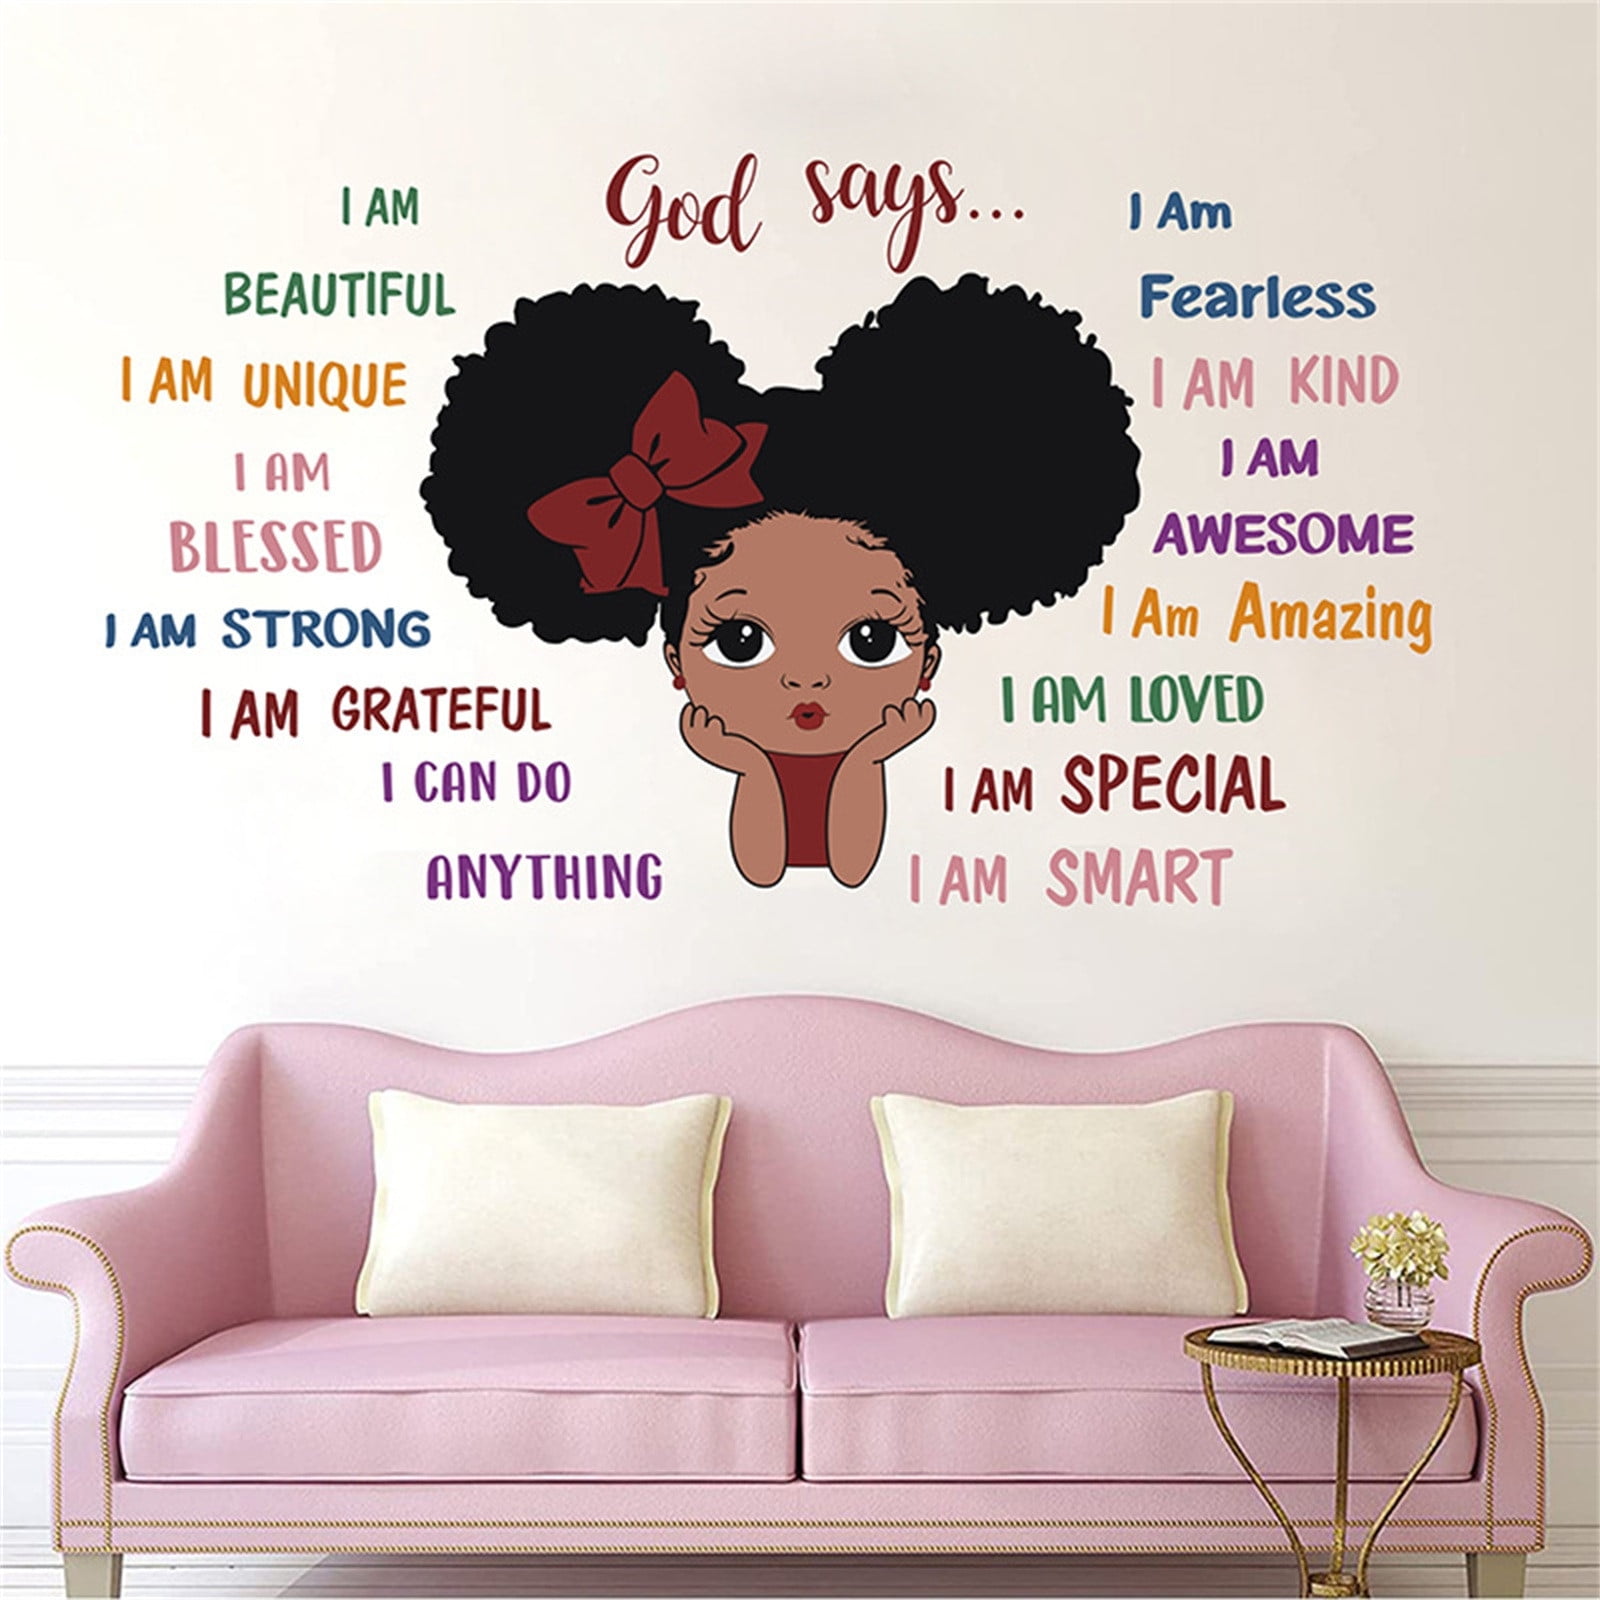 VBVC Black Girl Wall Stickers Colored English Admonition Stickers 